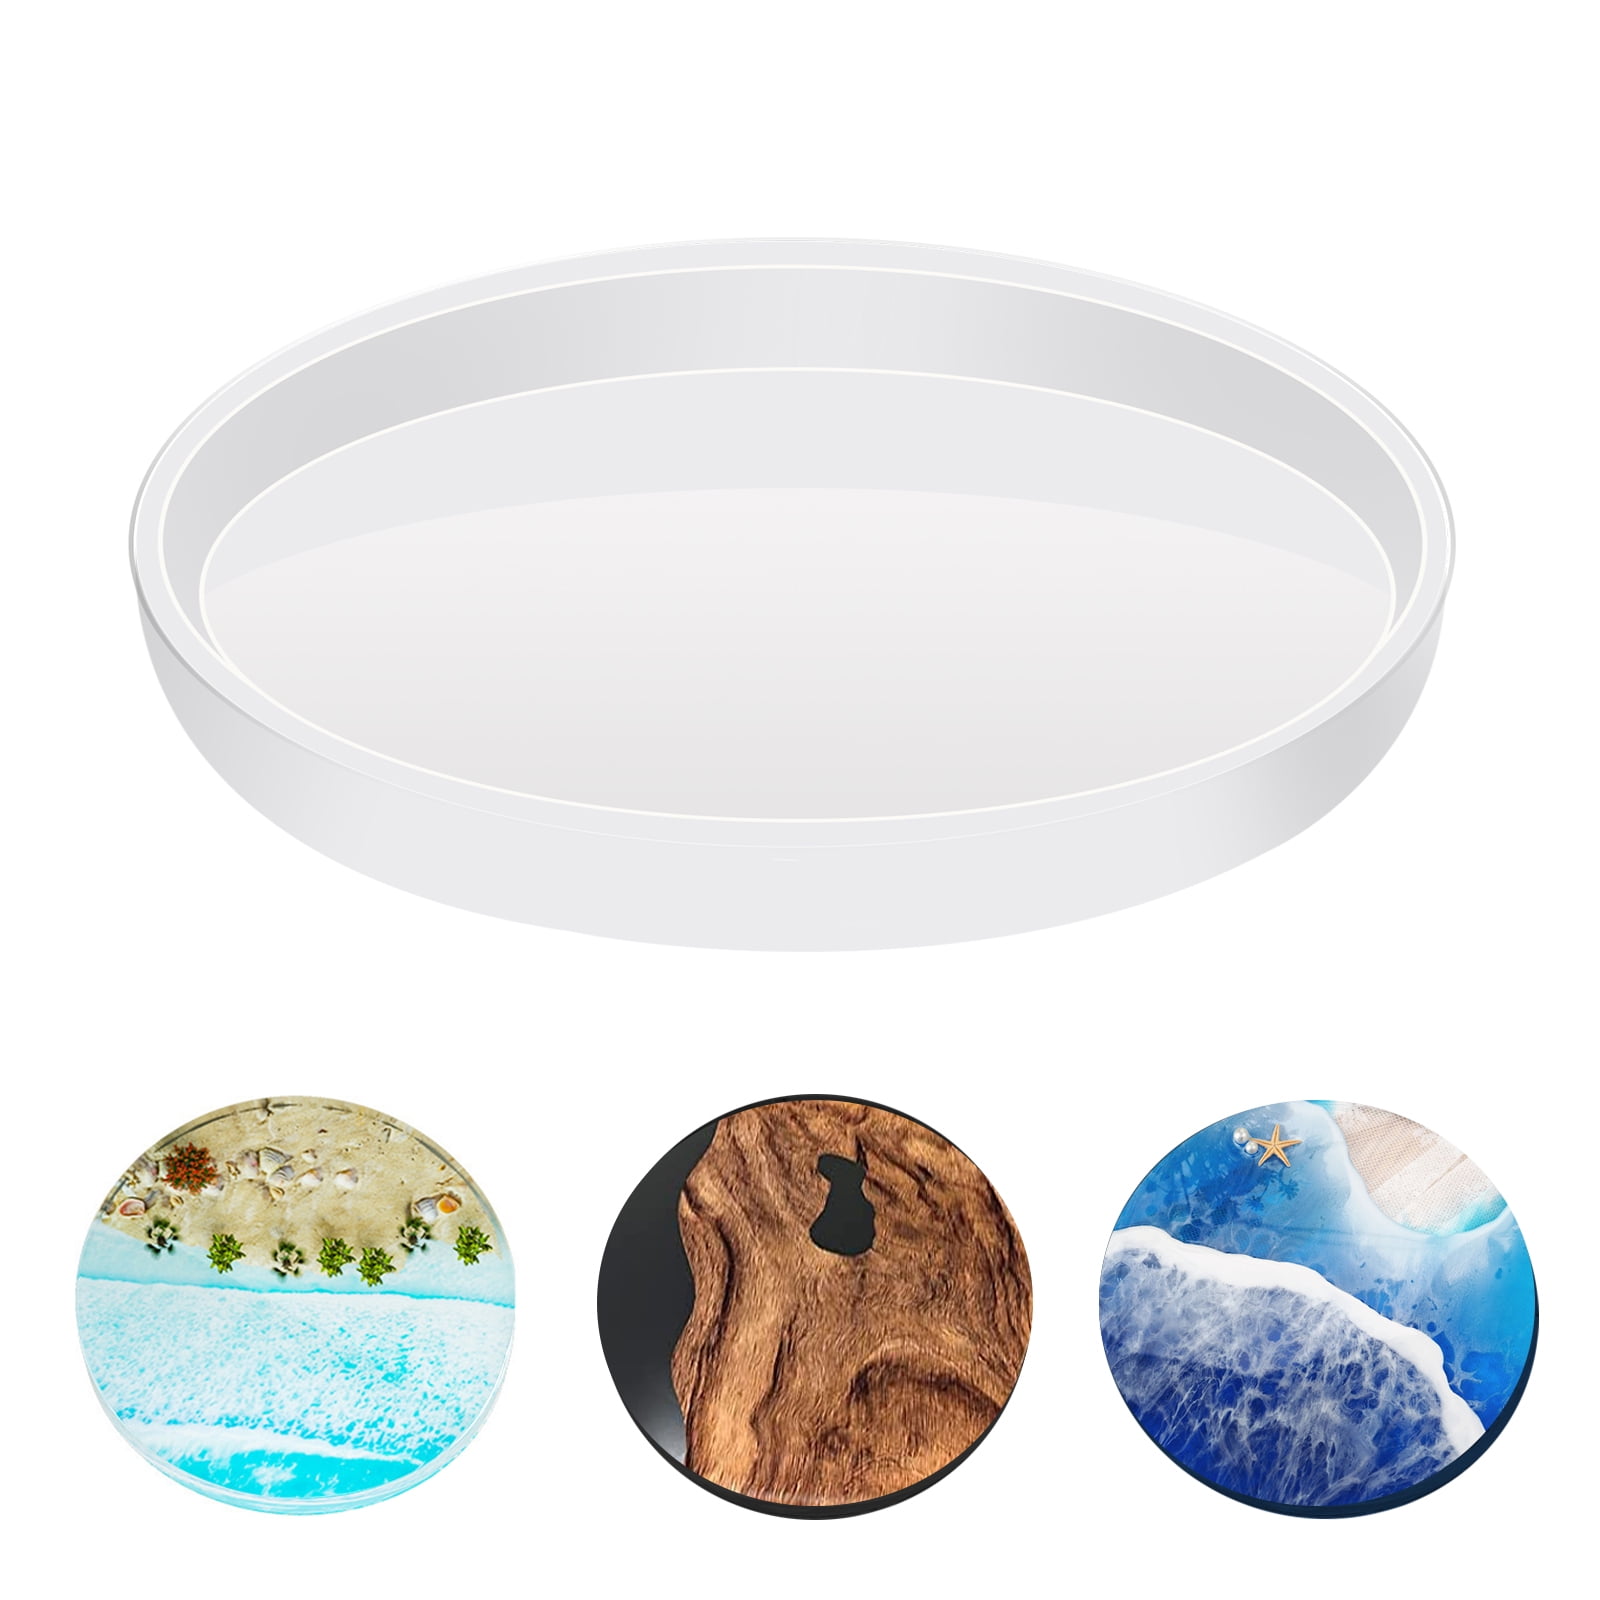  Ocean Large Rolling Tray Resin Mold with Coaster Resin Mold  Coastal Wave Riverbed Ocean Painting Art DIY Crafts Silicone Epoxy Molds  Organizer Tray Plate Table Ornament Home Decor : Arts, Crafts